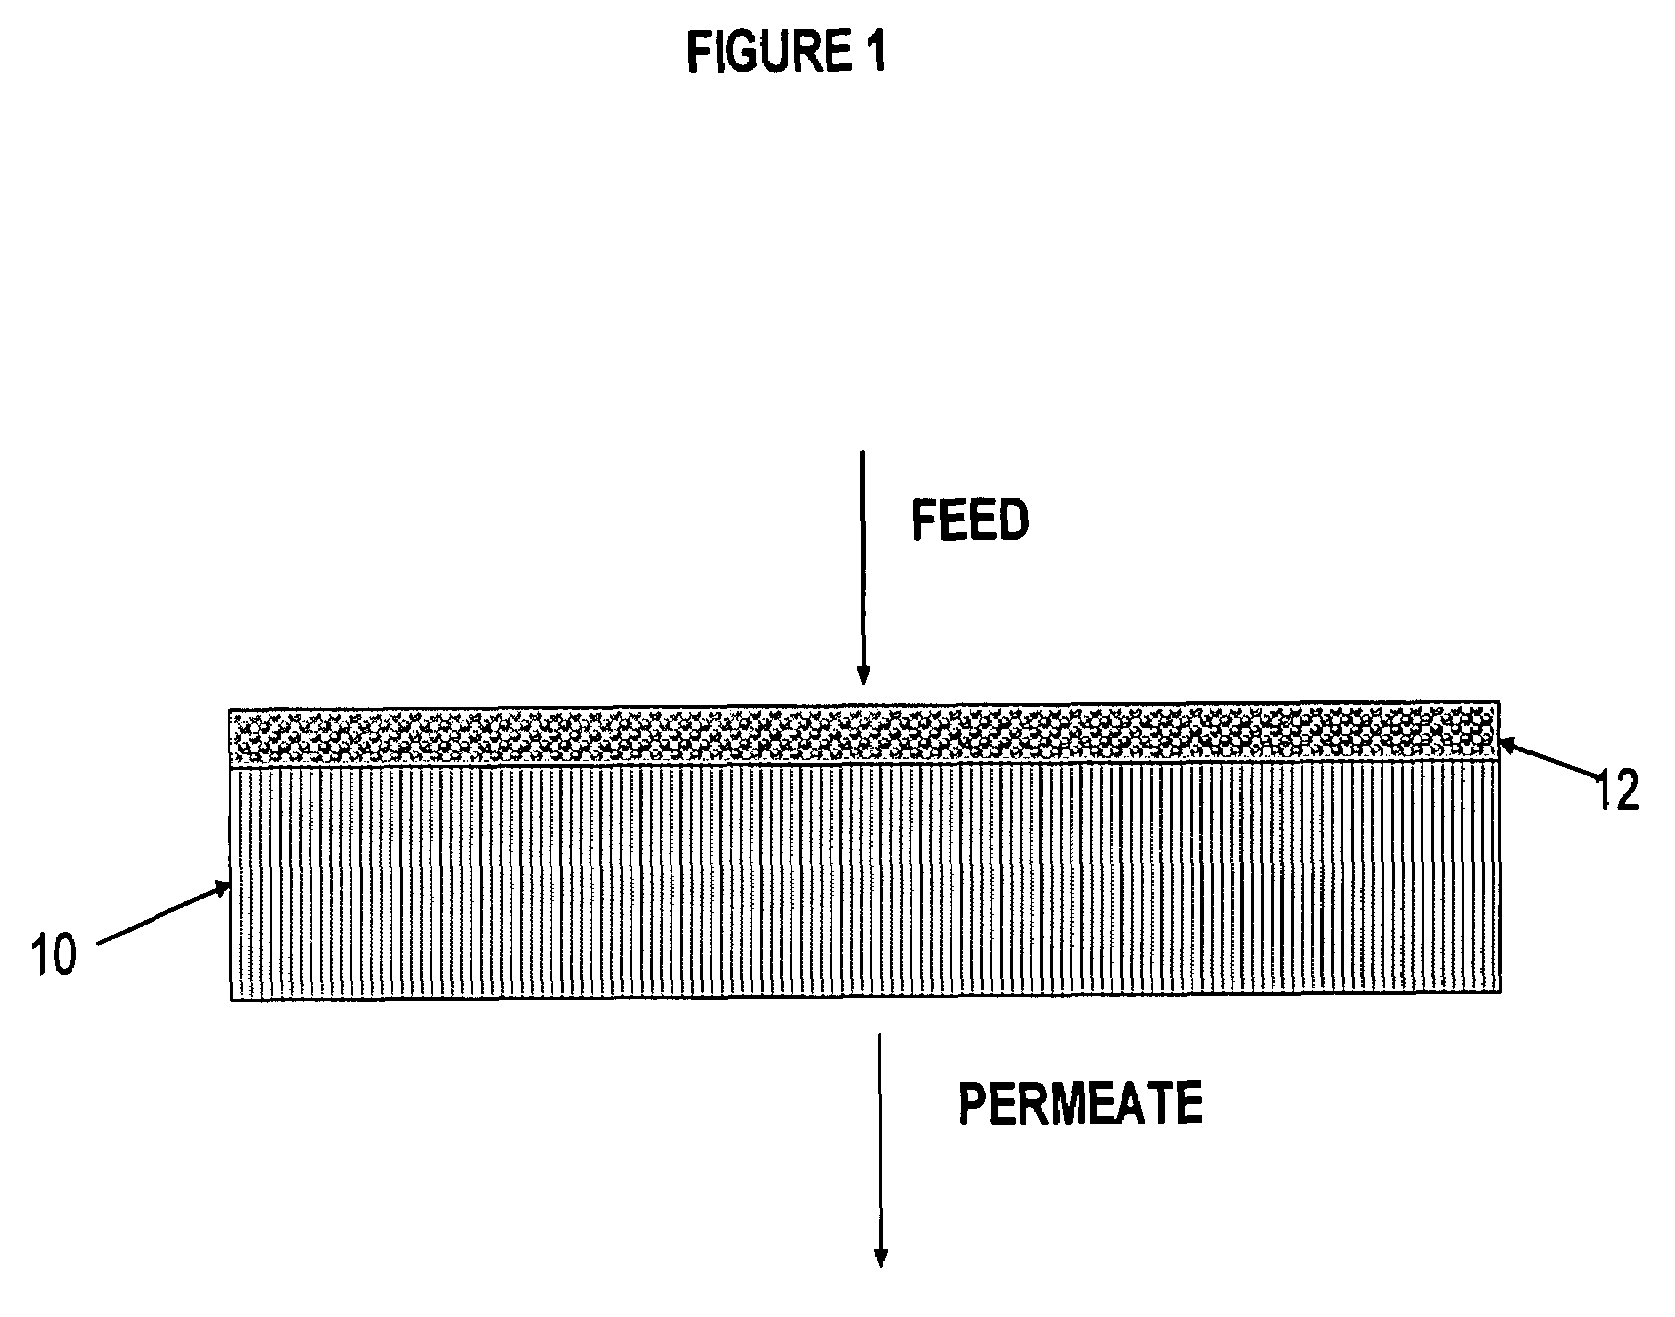 Polymer membrane for separating aromatic and aliphatic compounds